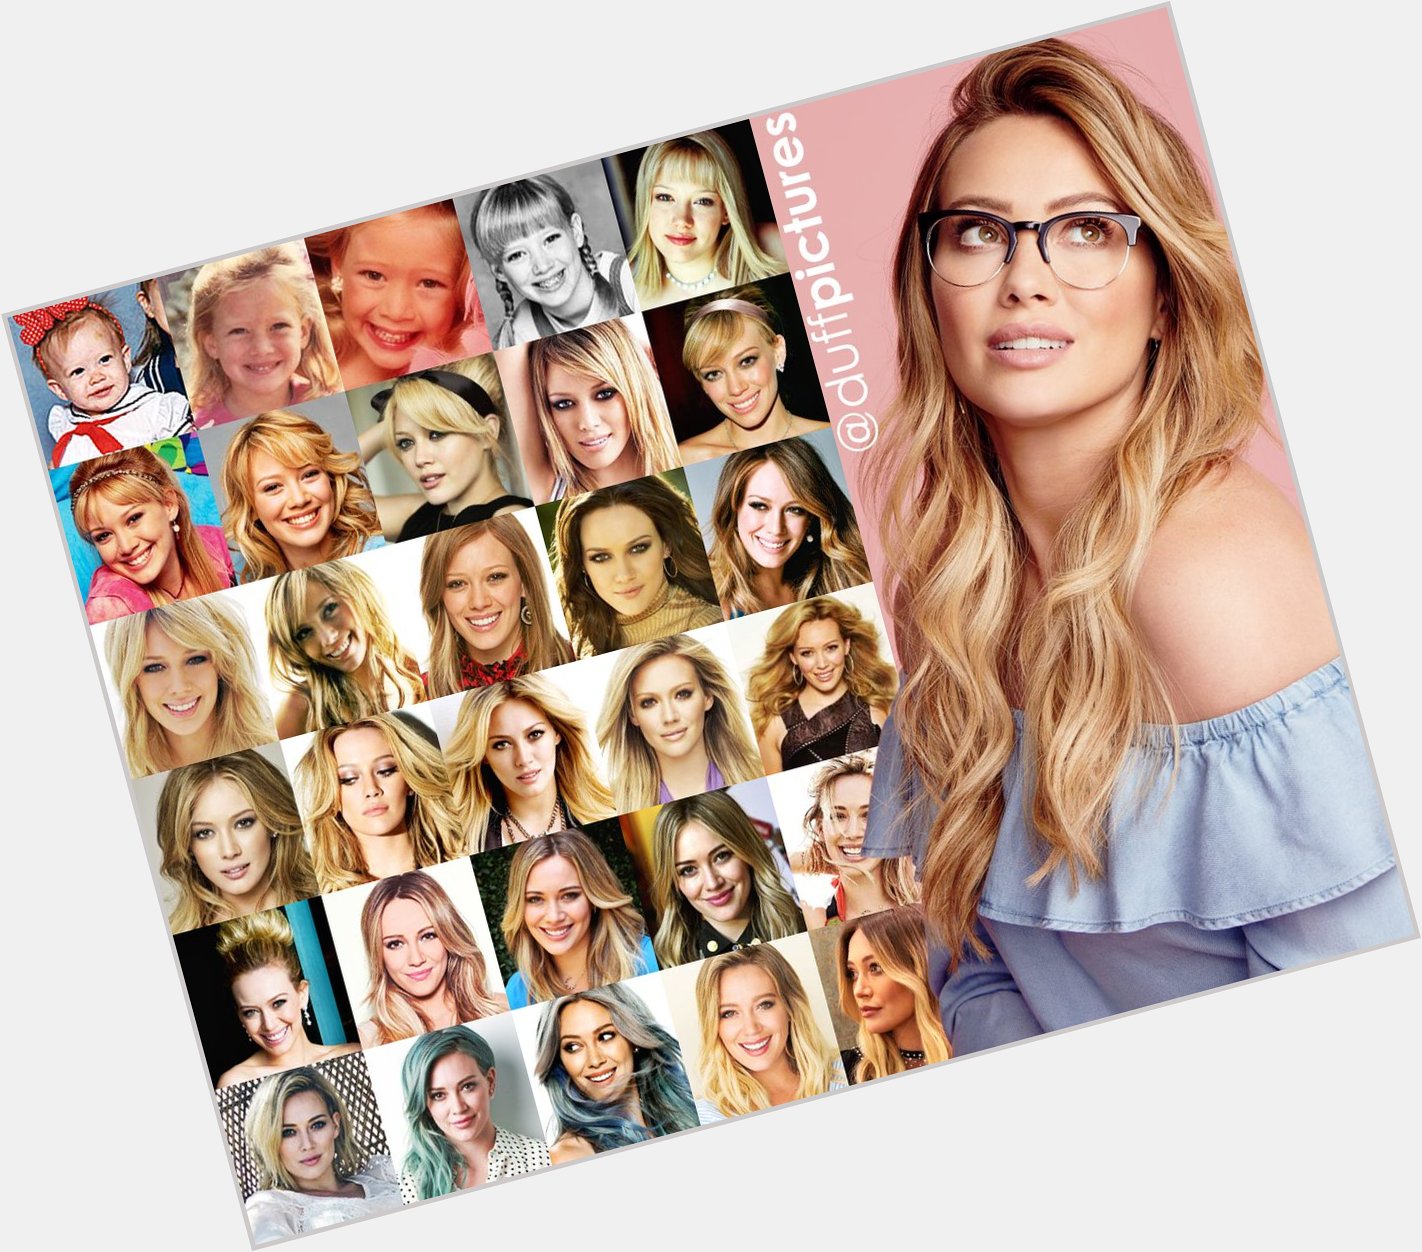 Hilary Duff through the years in 31 pictures.
Happy 31st Bday Lady! 